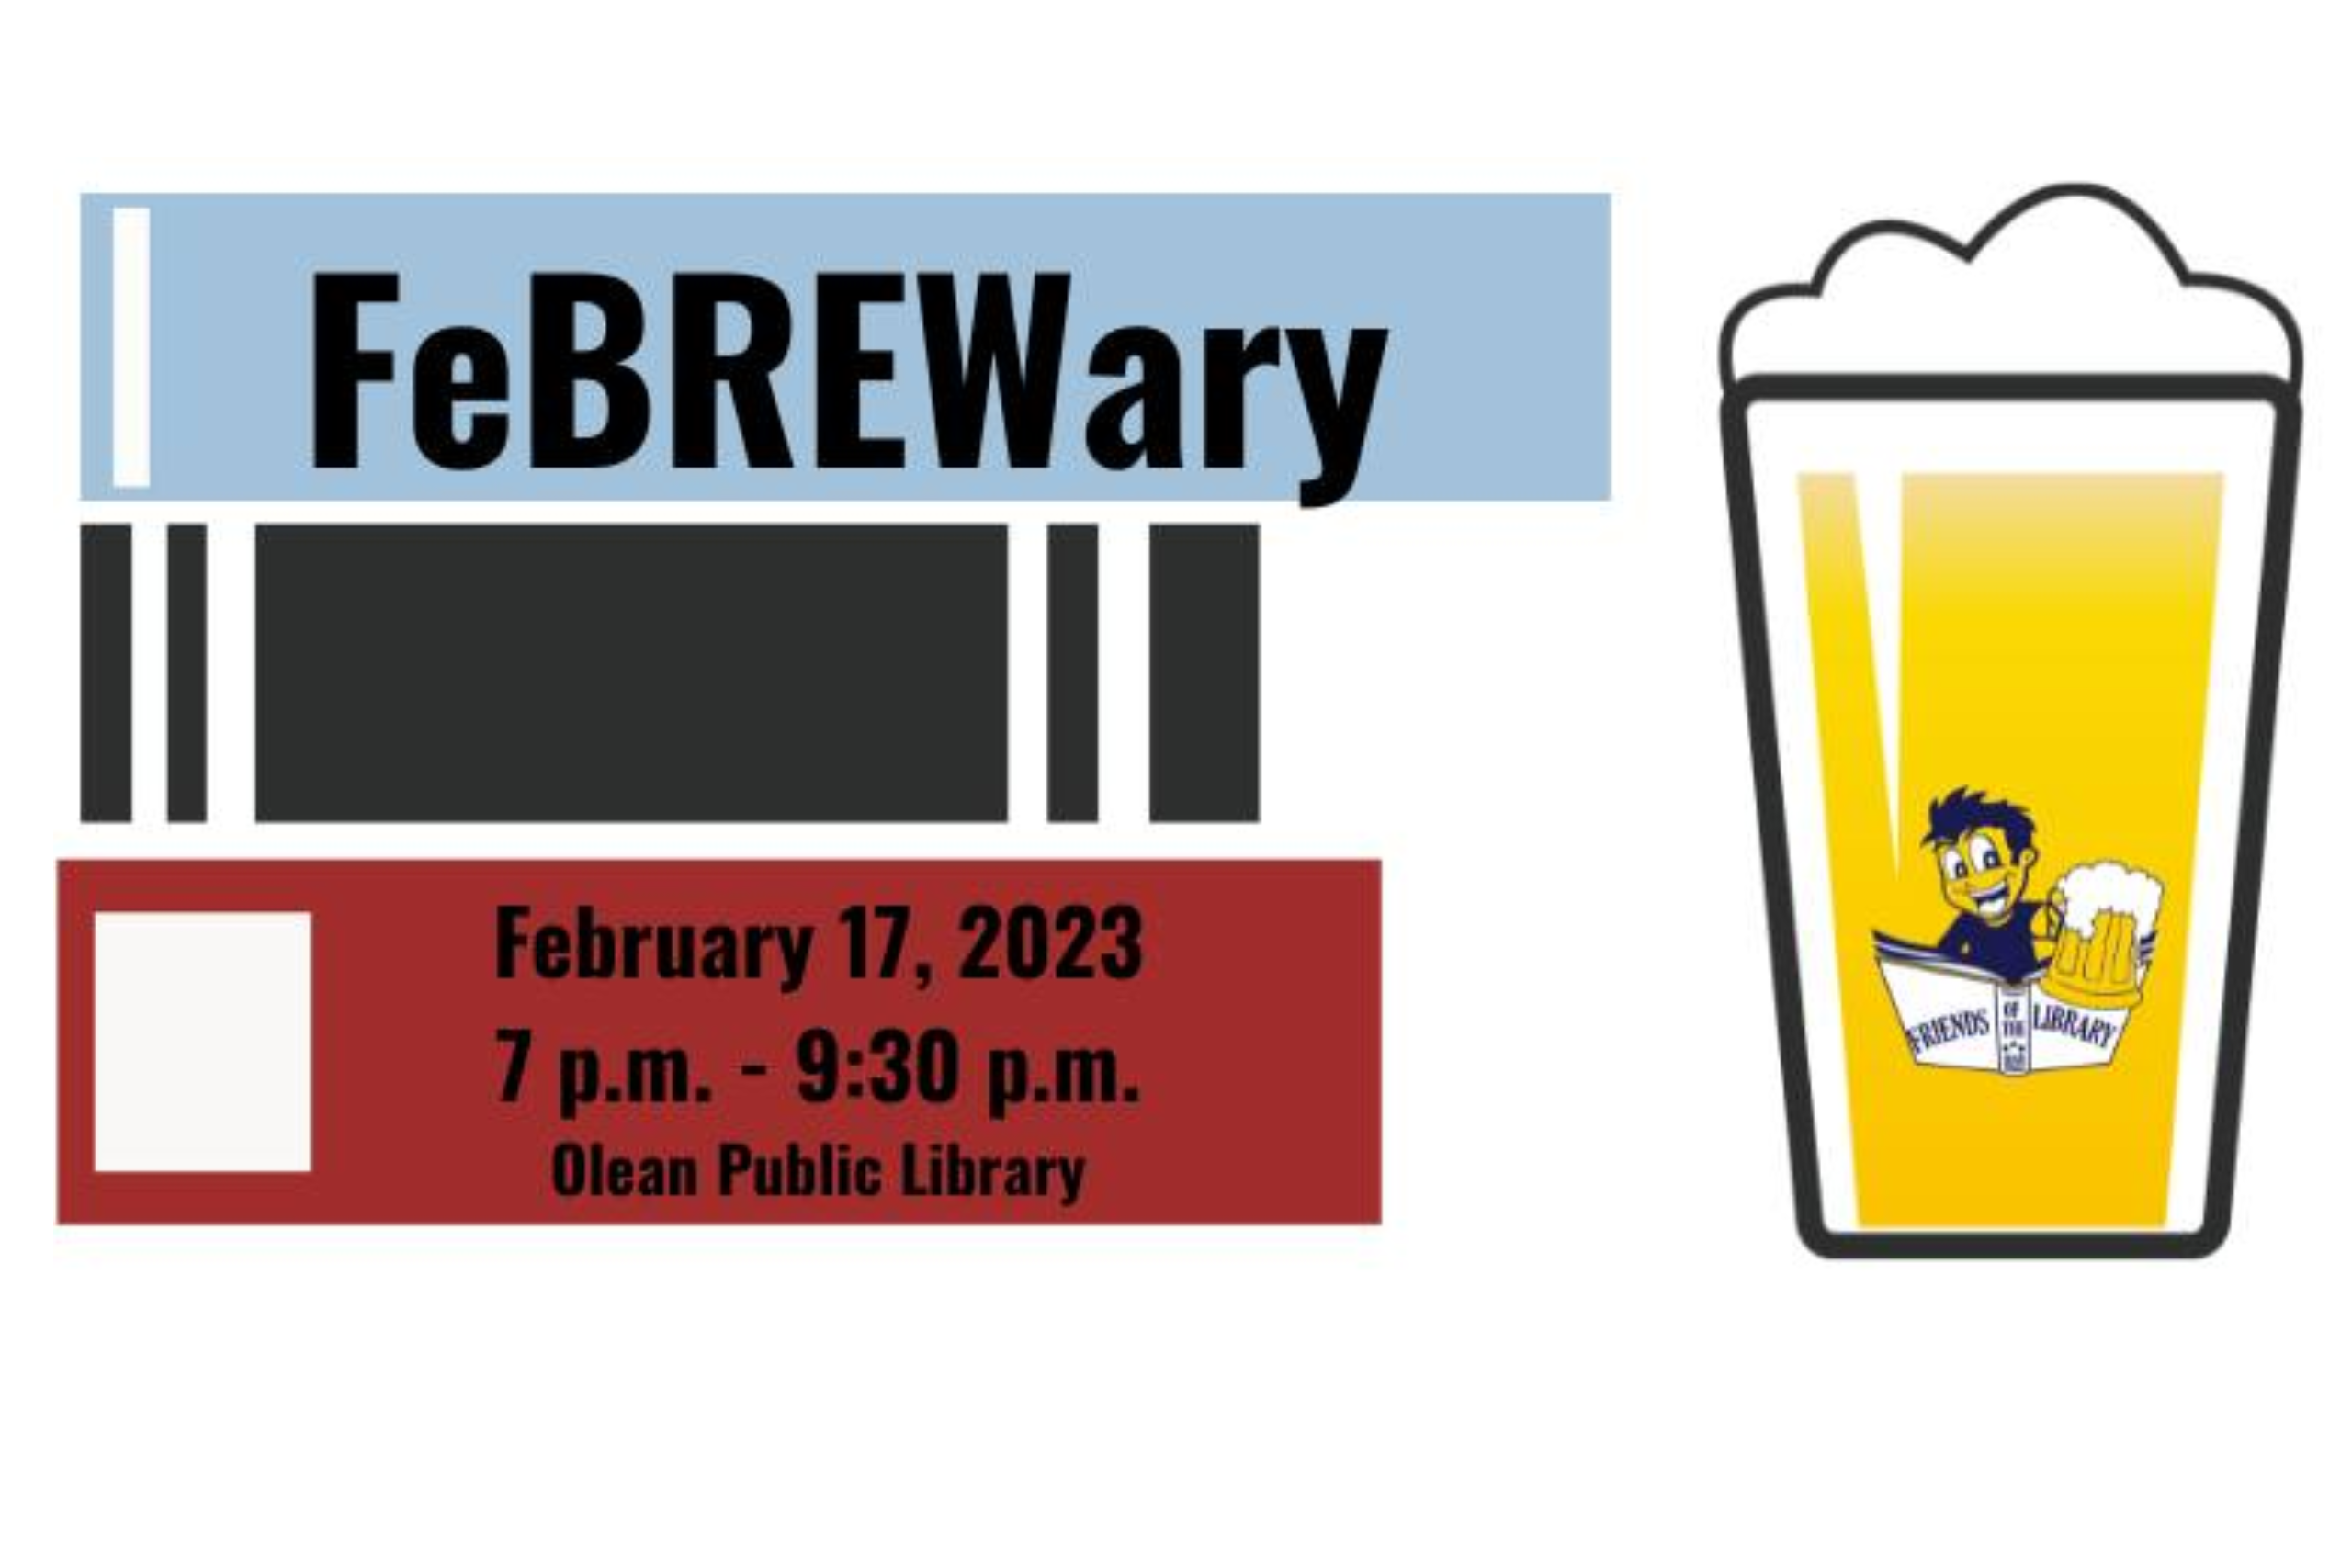 Friends of the Library FeBREWary event!